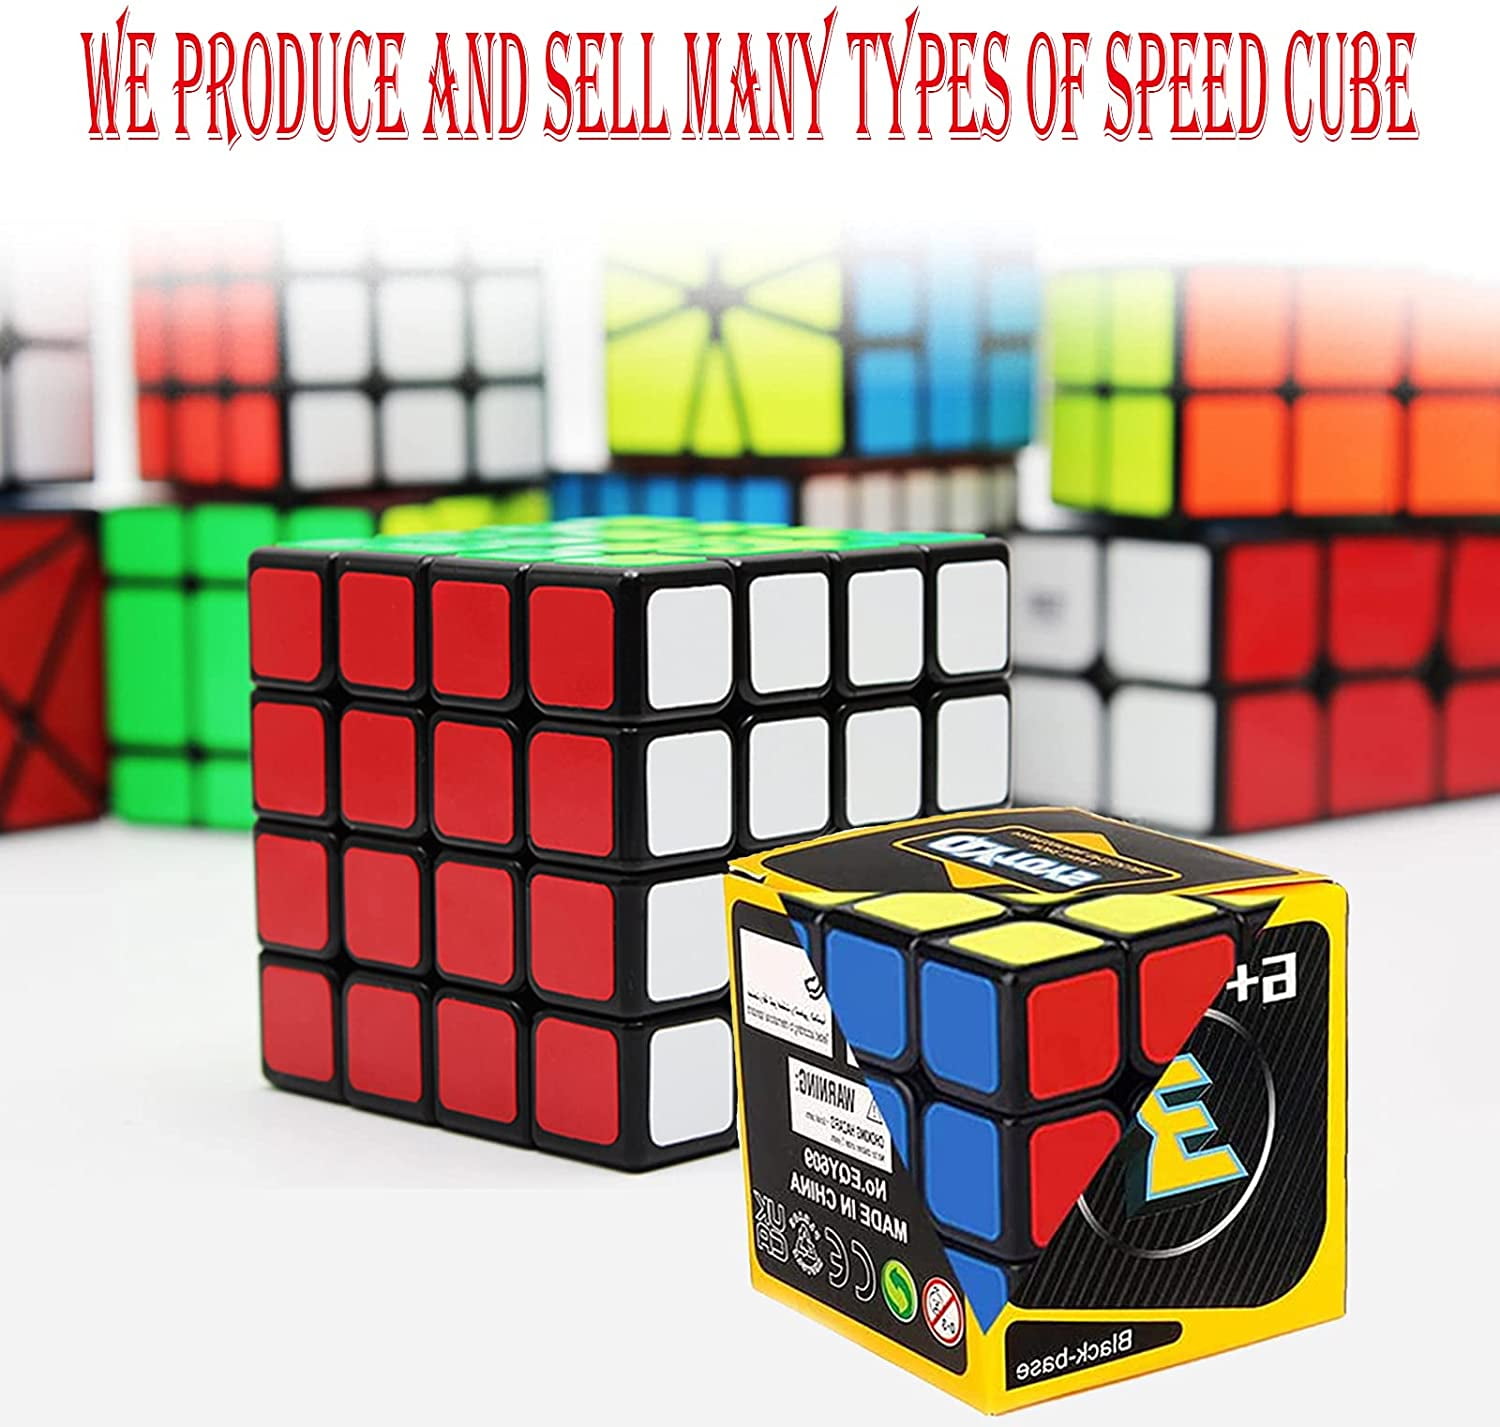 ZIOYCKL Speed Cube 3x3x3,Stickers Original Magic Cube Puzzle Toy,QYTOYS Sail W Speed Cube,Easy Turning & Smooth Play Durable Puzzle Cube Toy,Stickers Cube Classic 